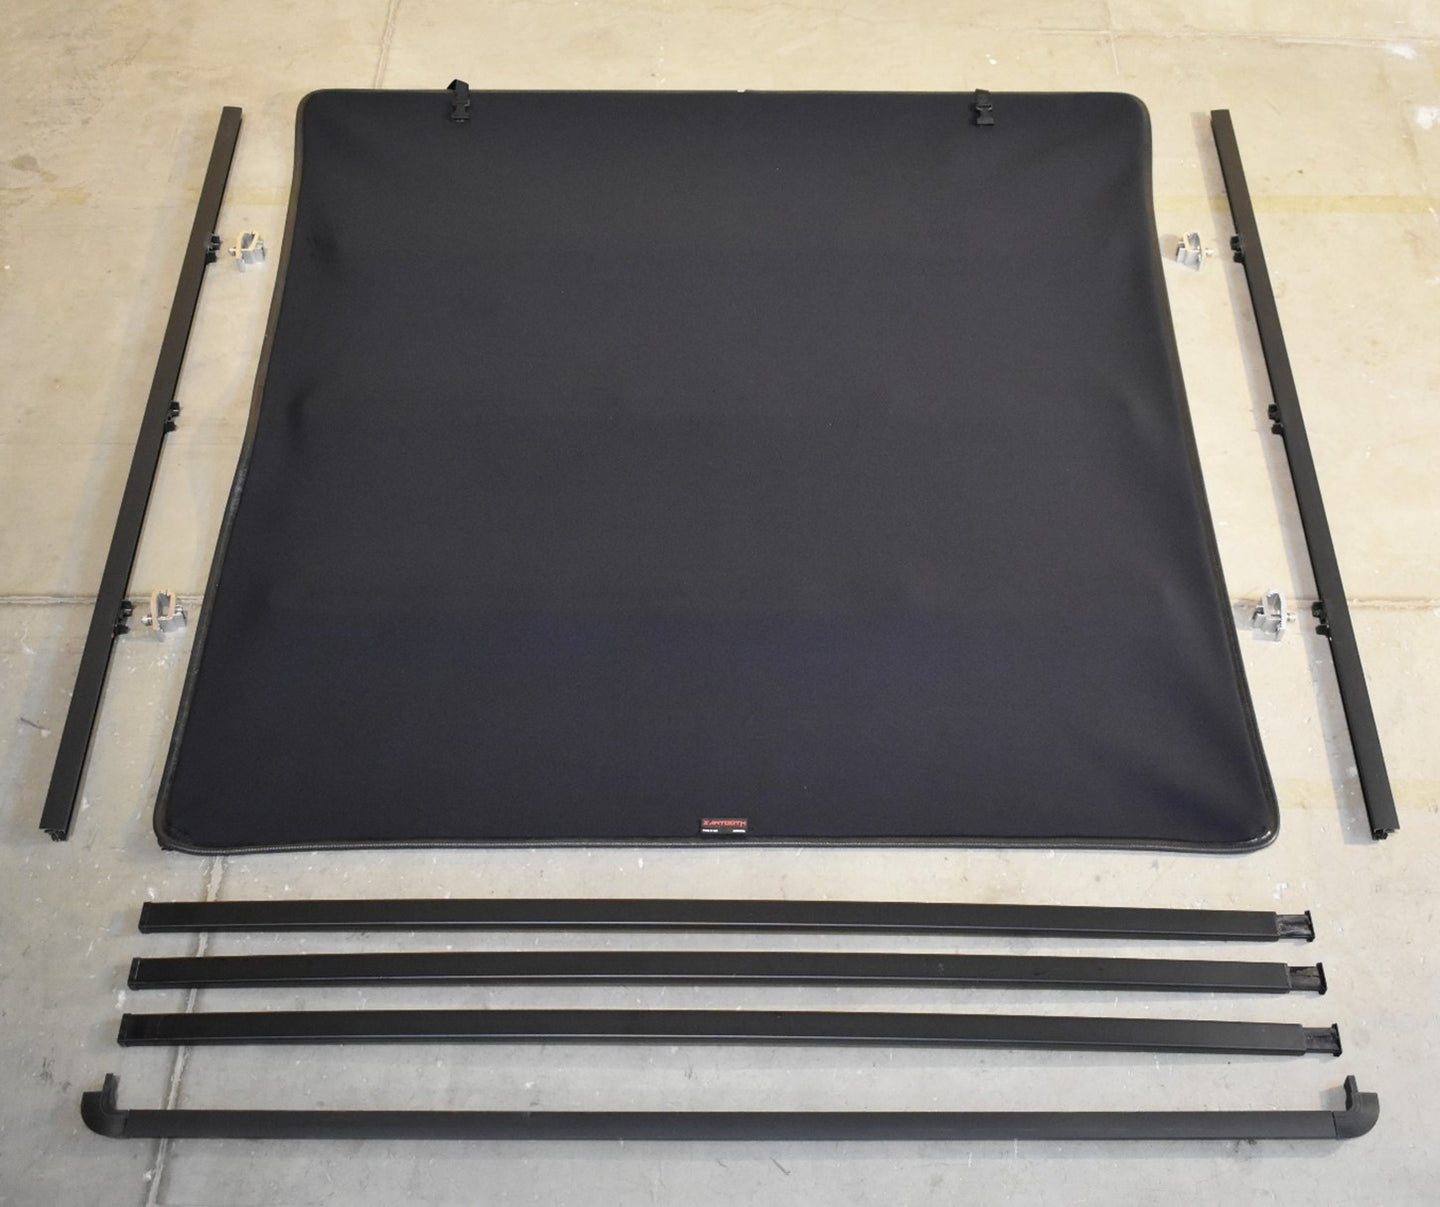 Ram 1500 Sawtooth expandable pickup truck bed components